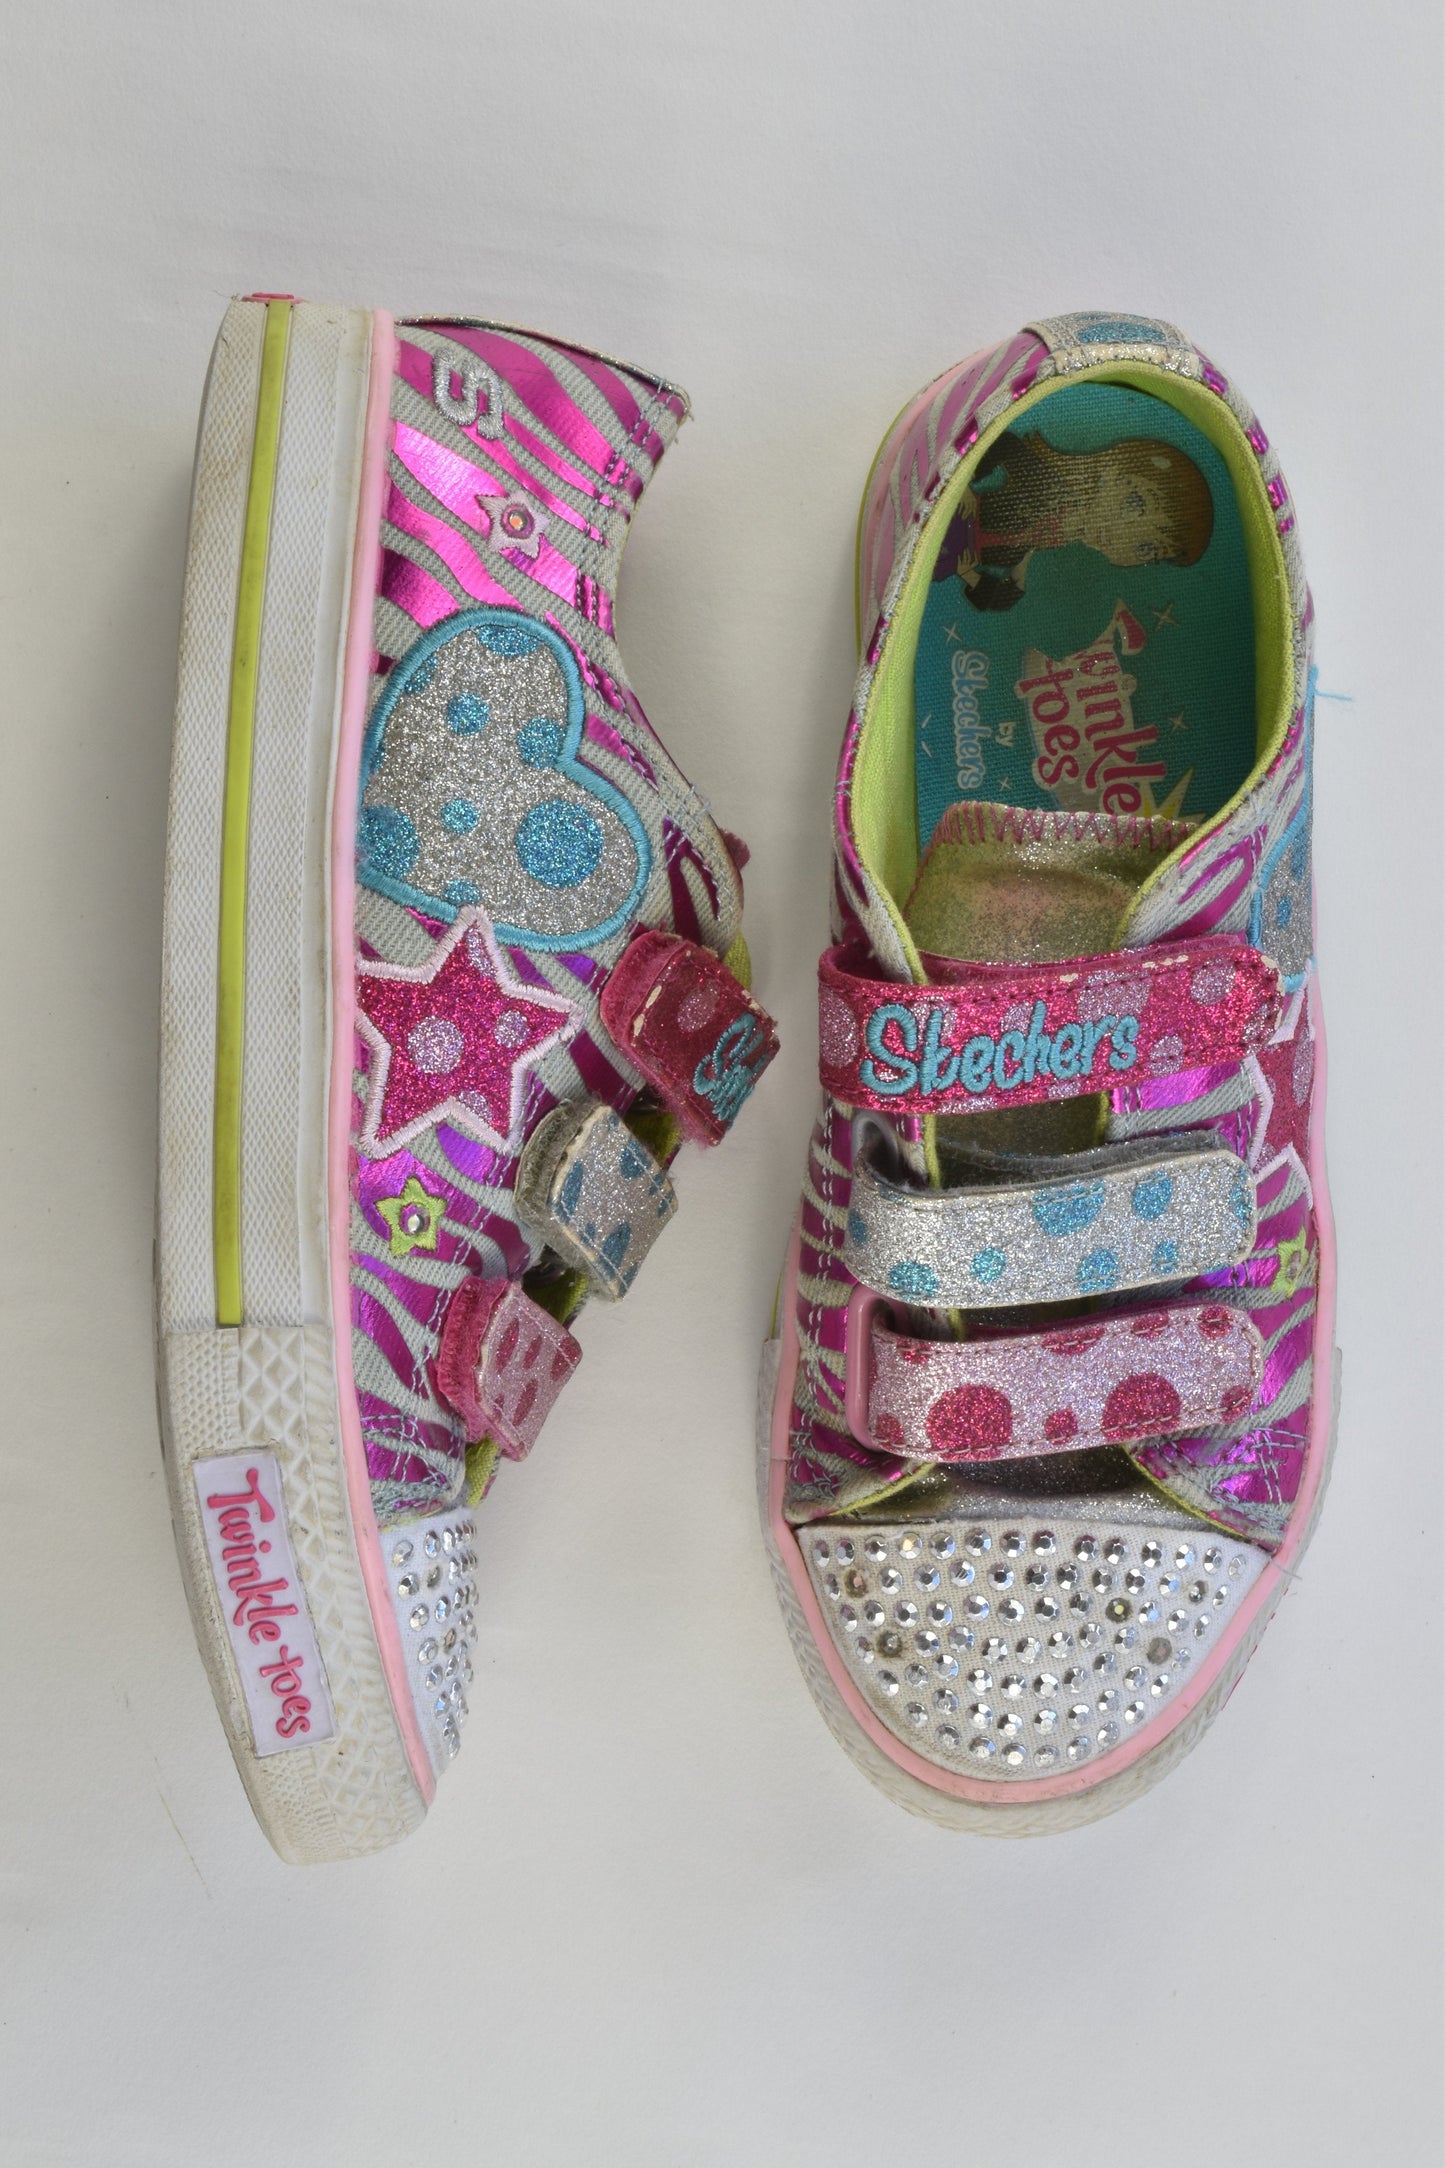 Skechers Twinkle Toes Size 13.5 Light-Up Shoes